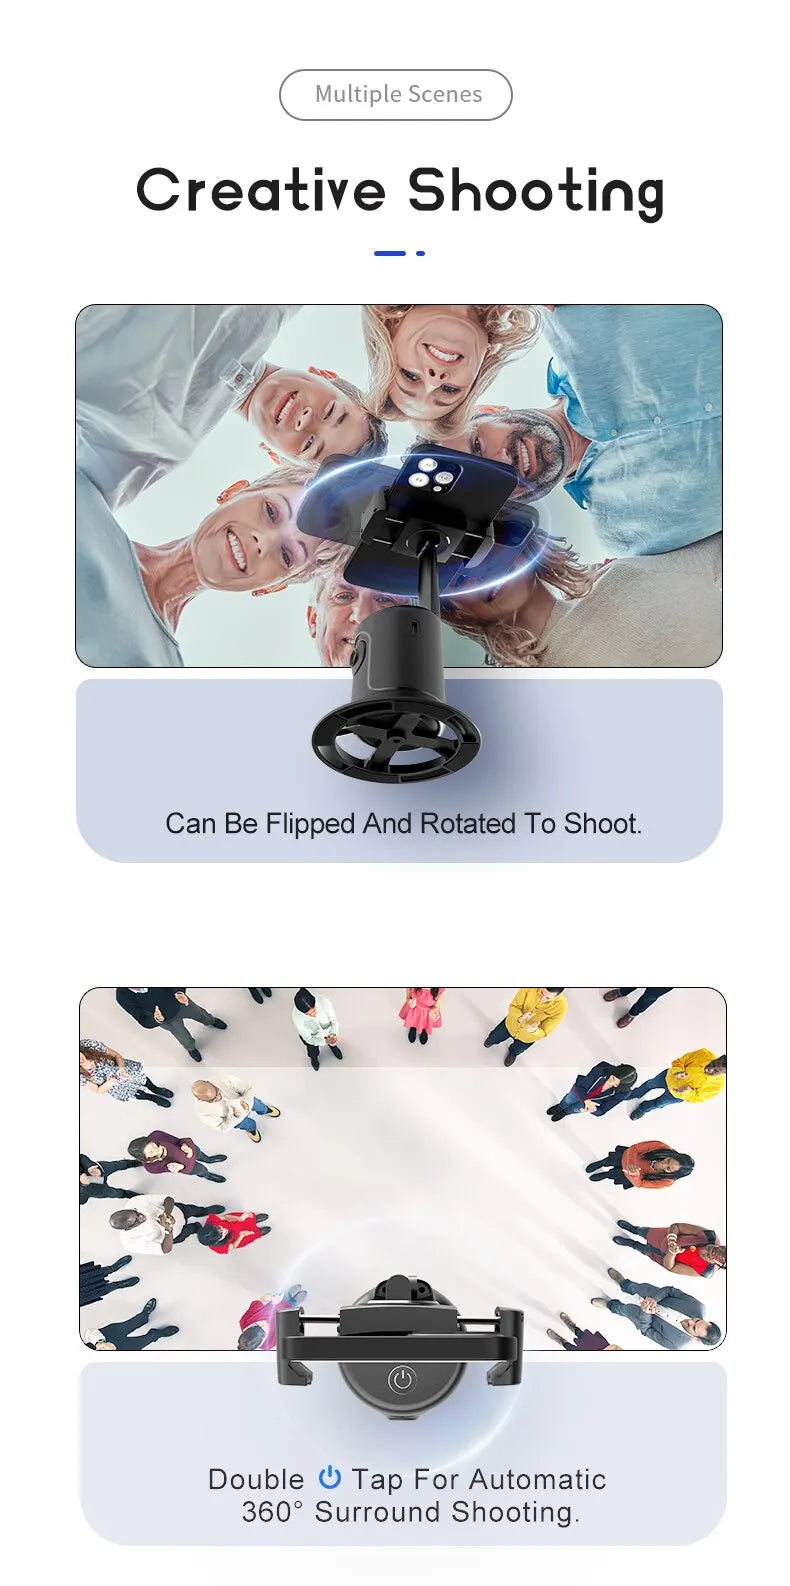 Auto Face Tracking Phone Holder Tripod Stand. Smart Selfie Stick. 360 Rotation. Fast Face & Object Tracking Cameraman Robot Mount.